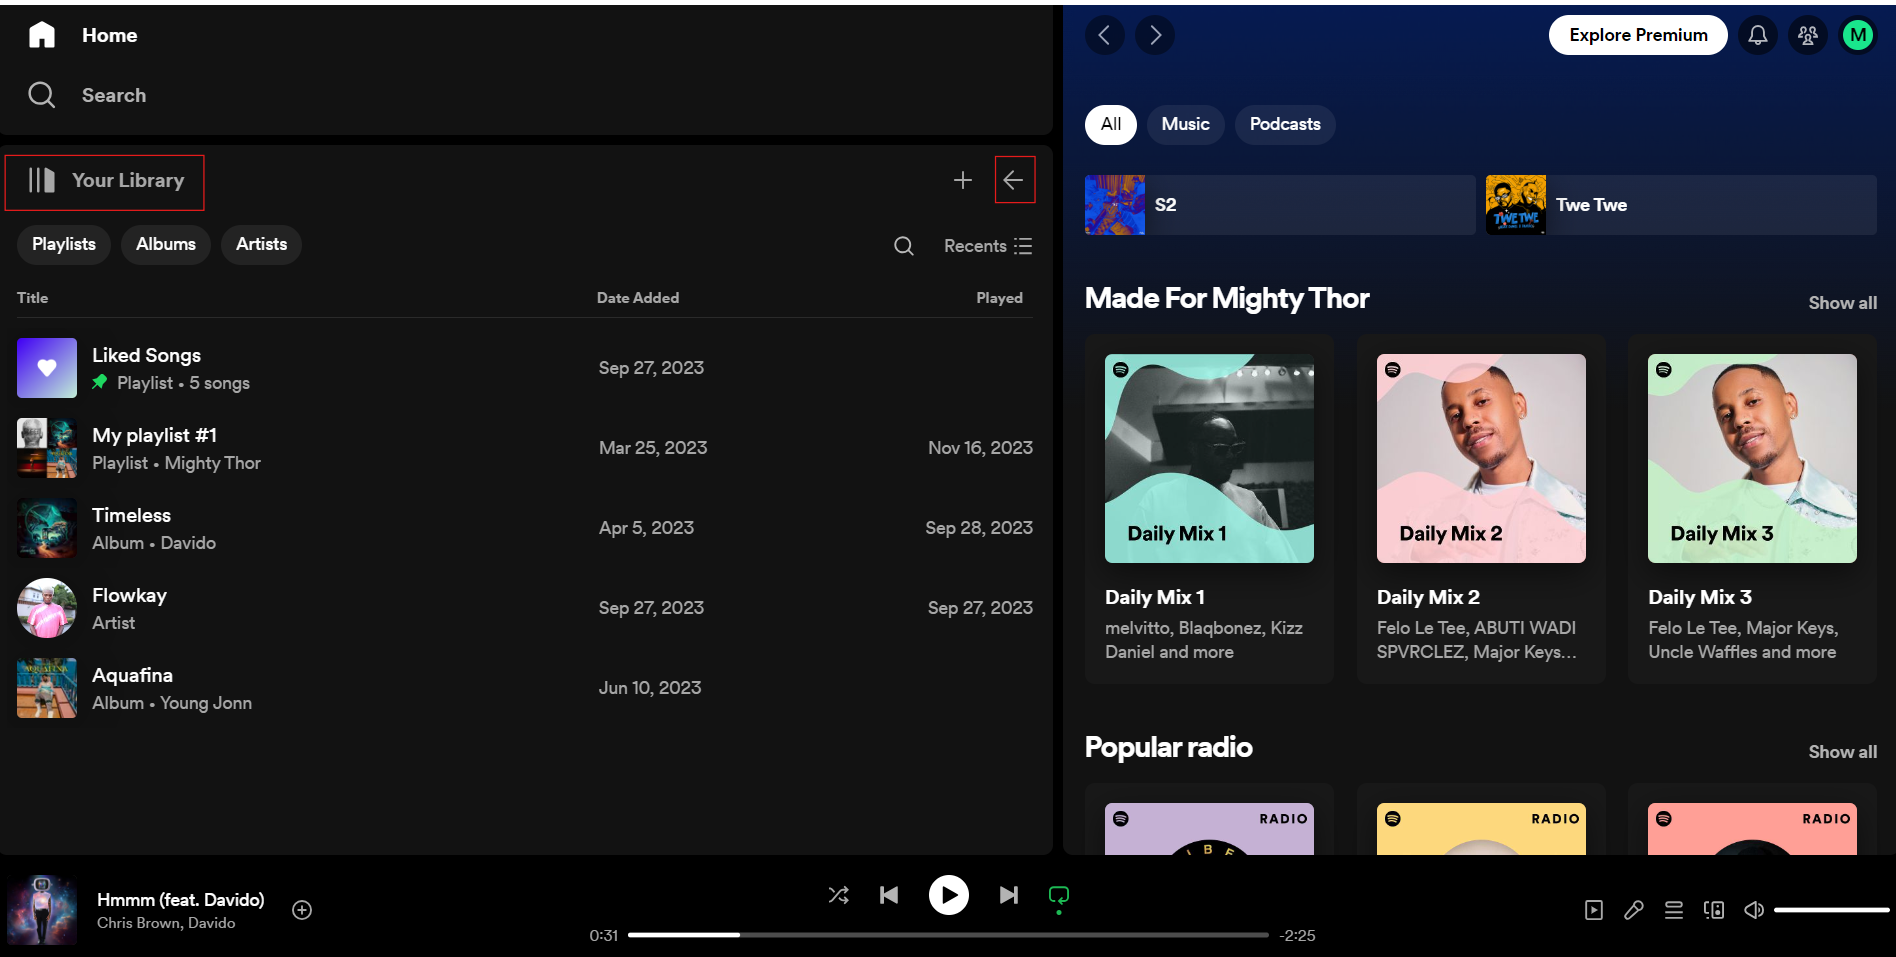 How to Create and Share Music Playlists on Spotify